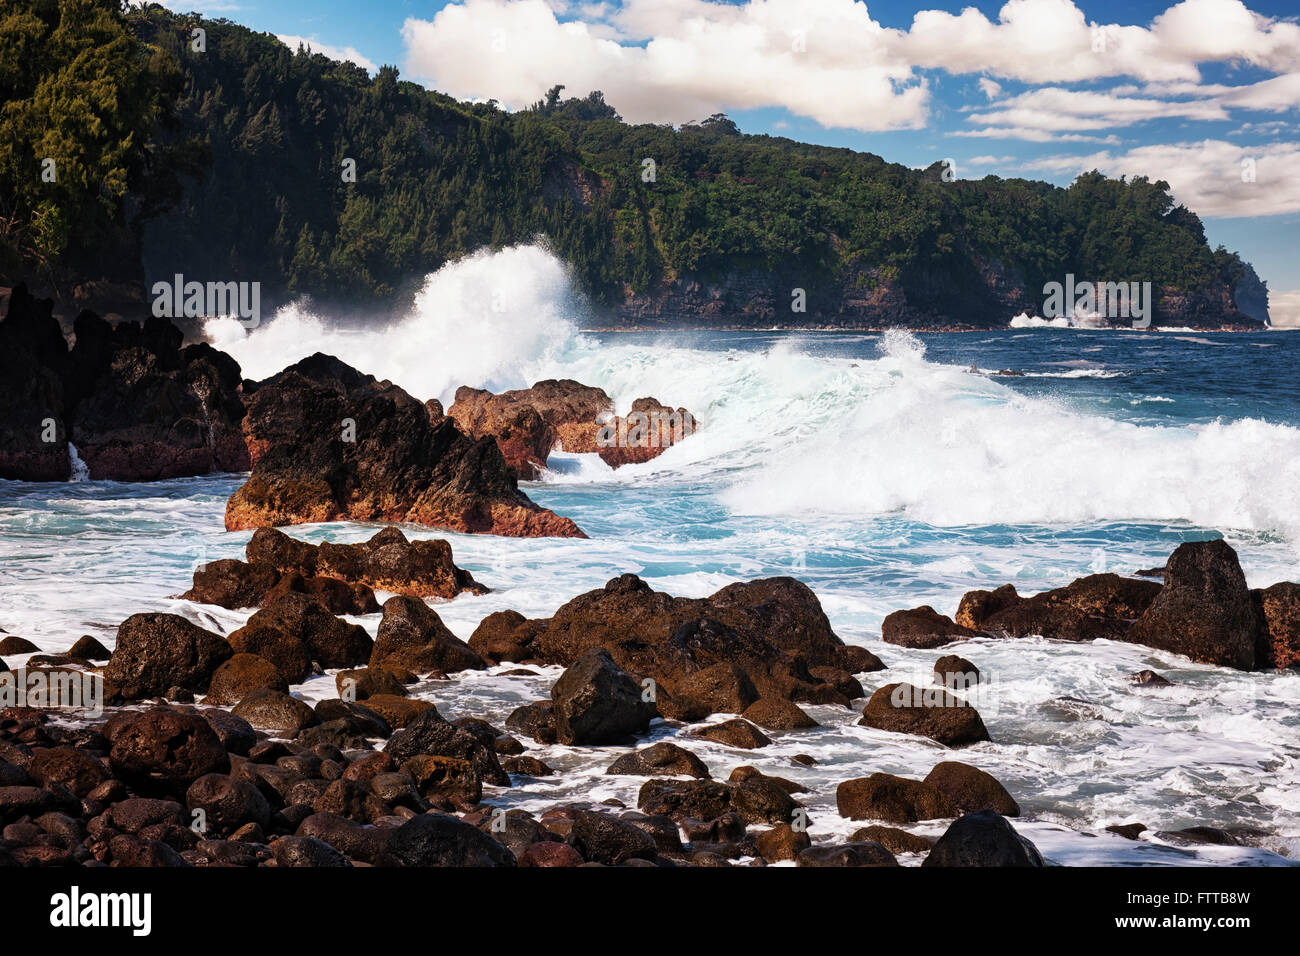 Large swells and heavy surf pound the lava shoreline at Laupahoehoe Point on the Big Island of Hawaii. Stock Photo